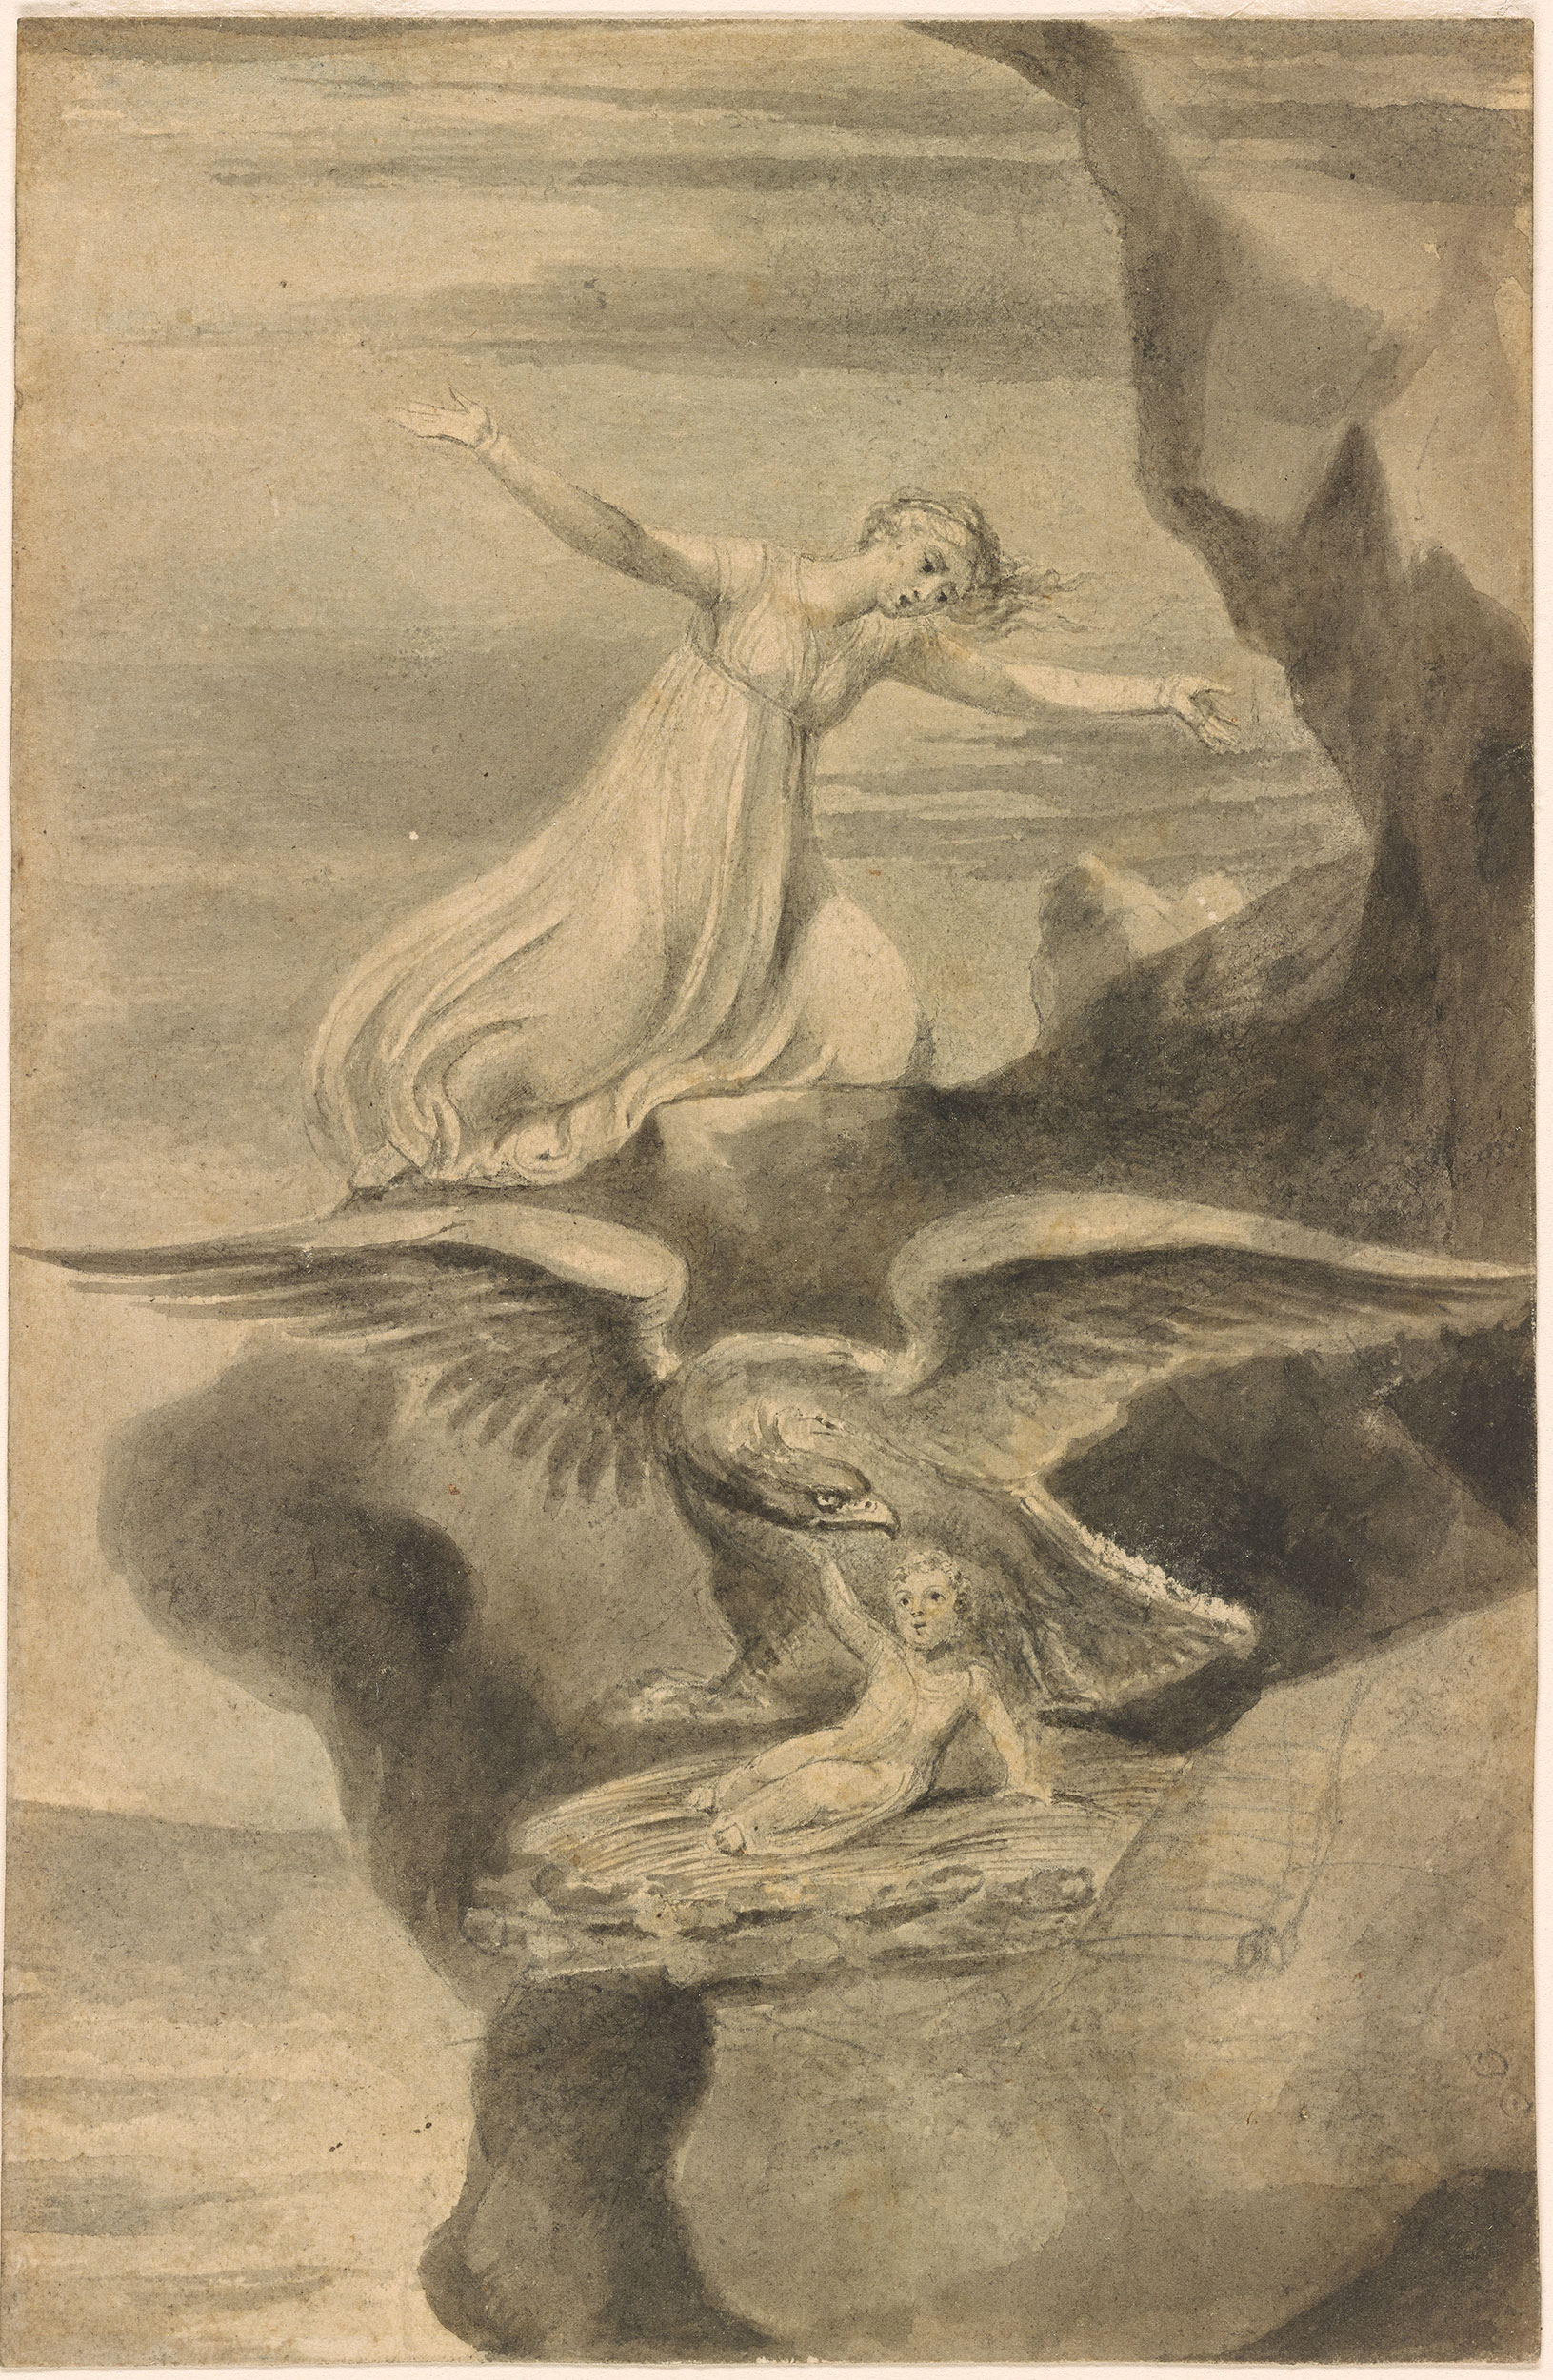 William Blake | The Eagle | Drawings Online | The Morgan Library & Museum